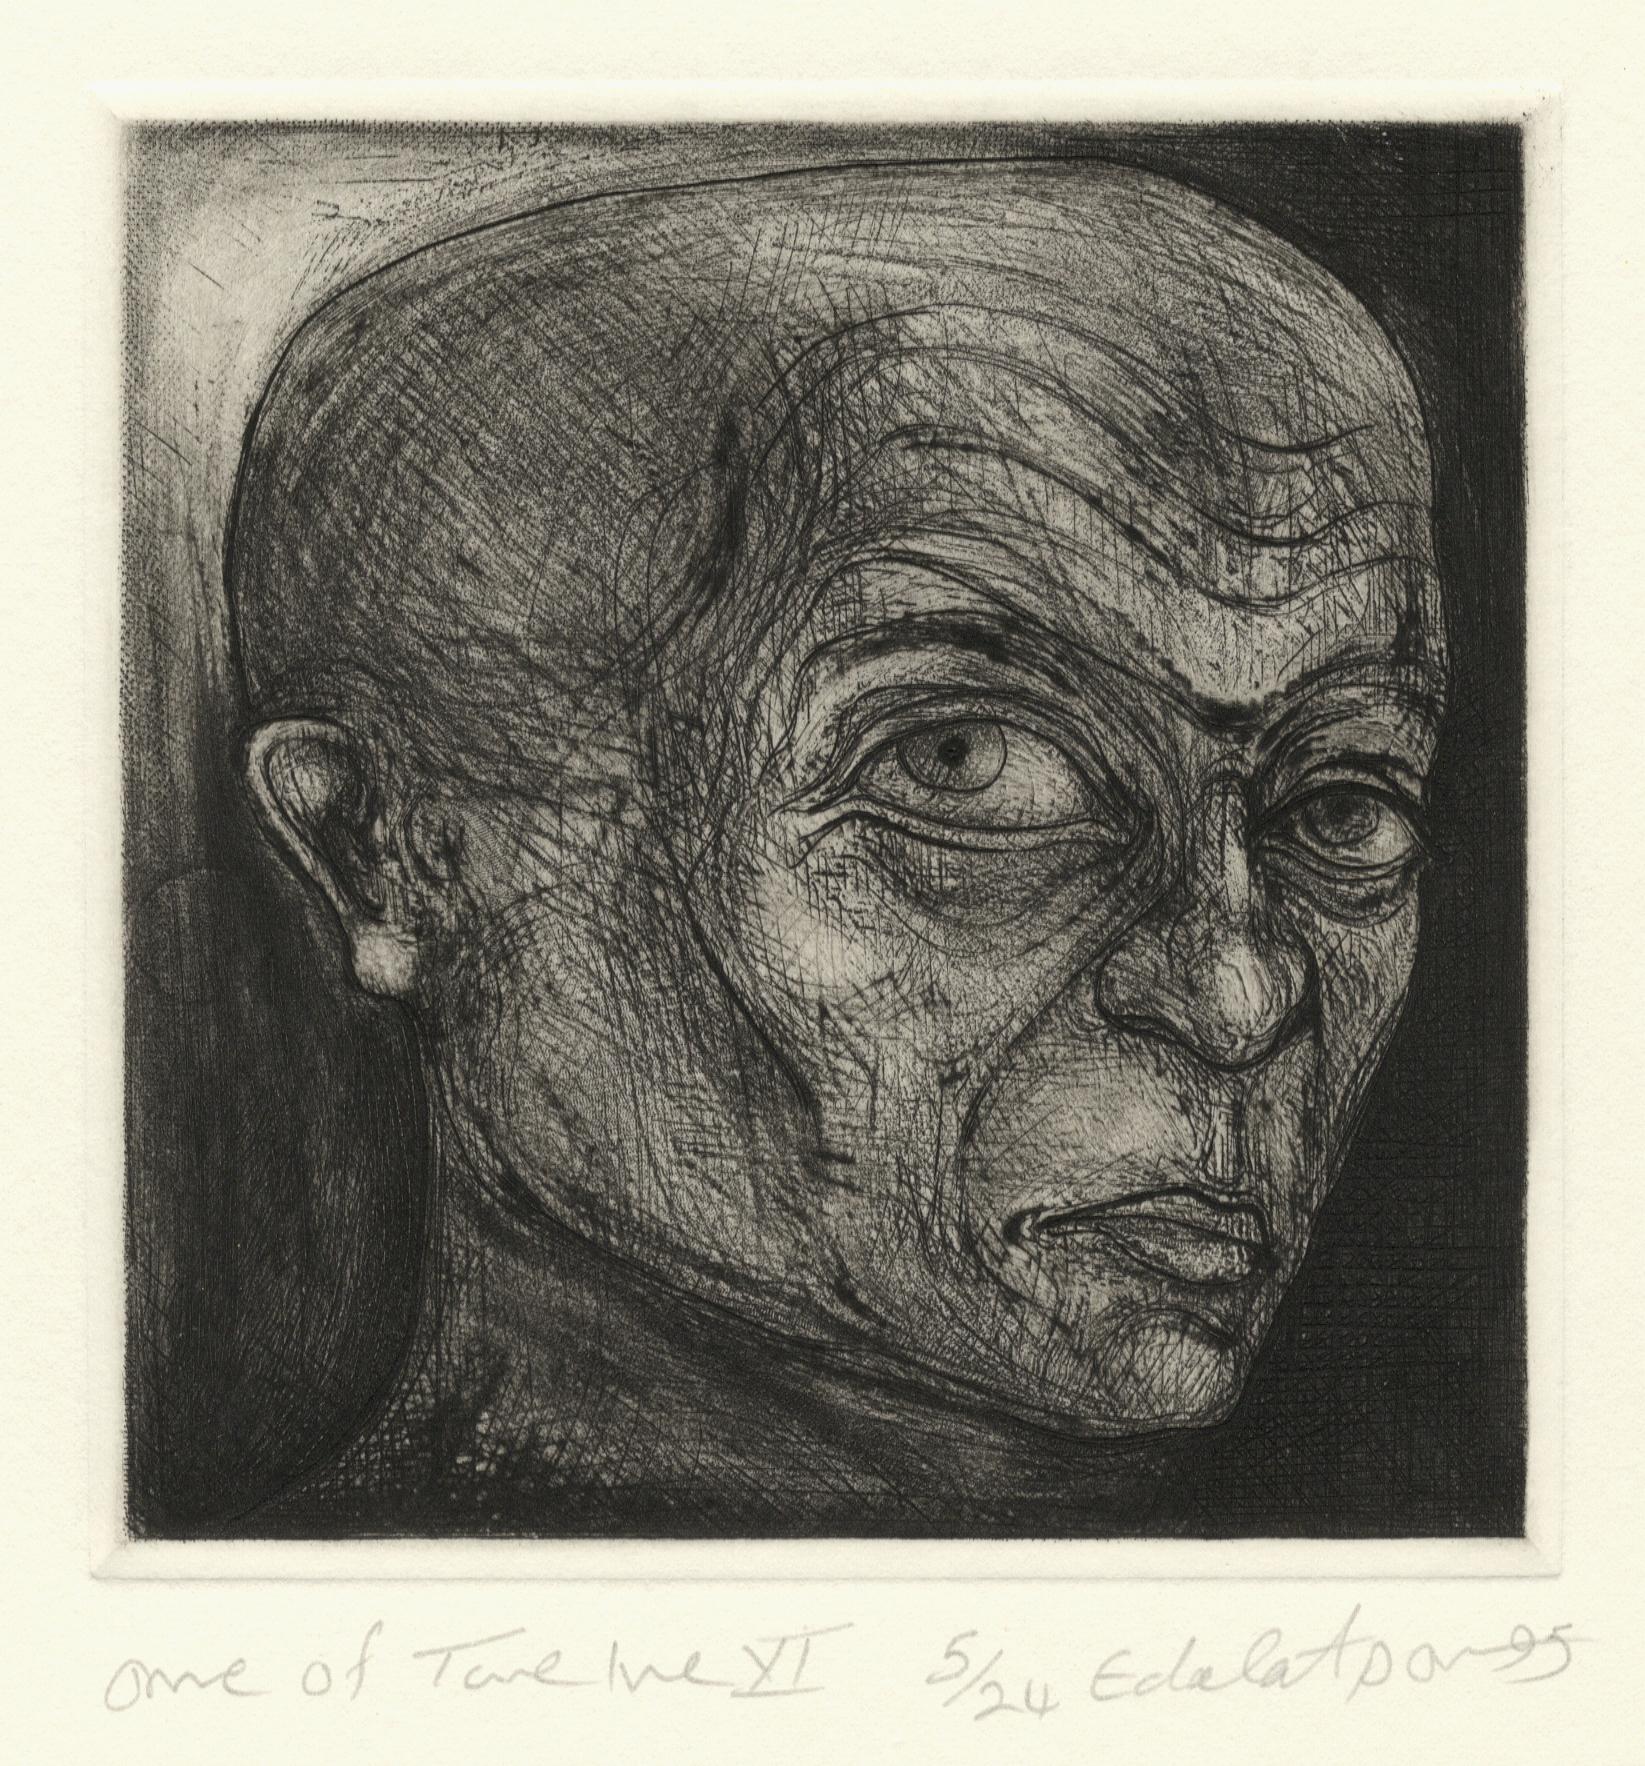 One of Twelve XI (etchings of one of 12 heads based on  monumental sculpture) - Post-Modern Print by Seyed M. S. Edalatpour